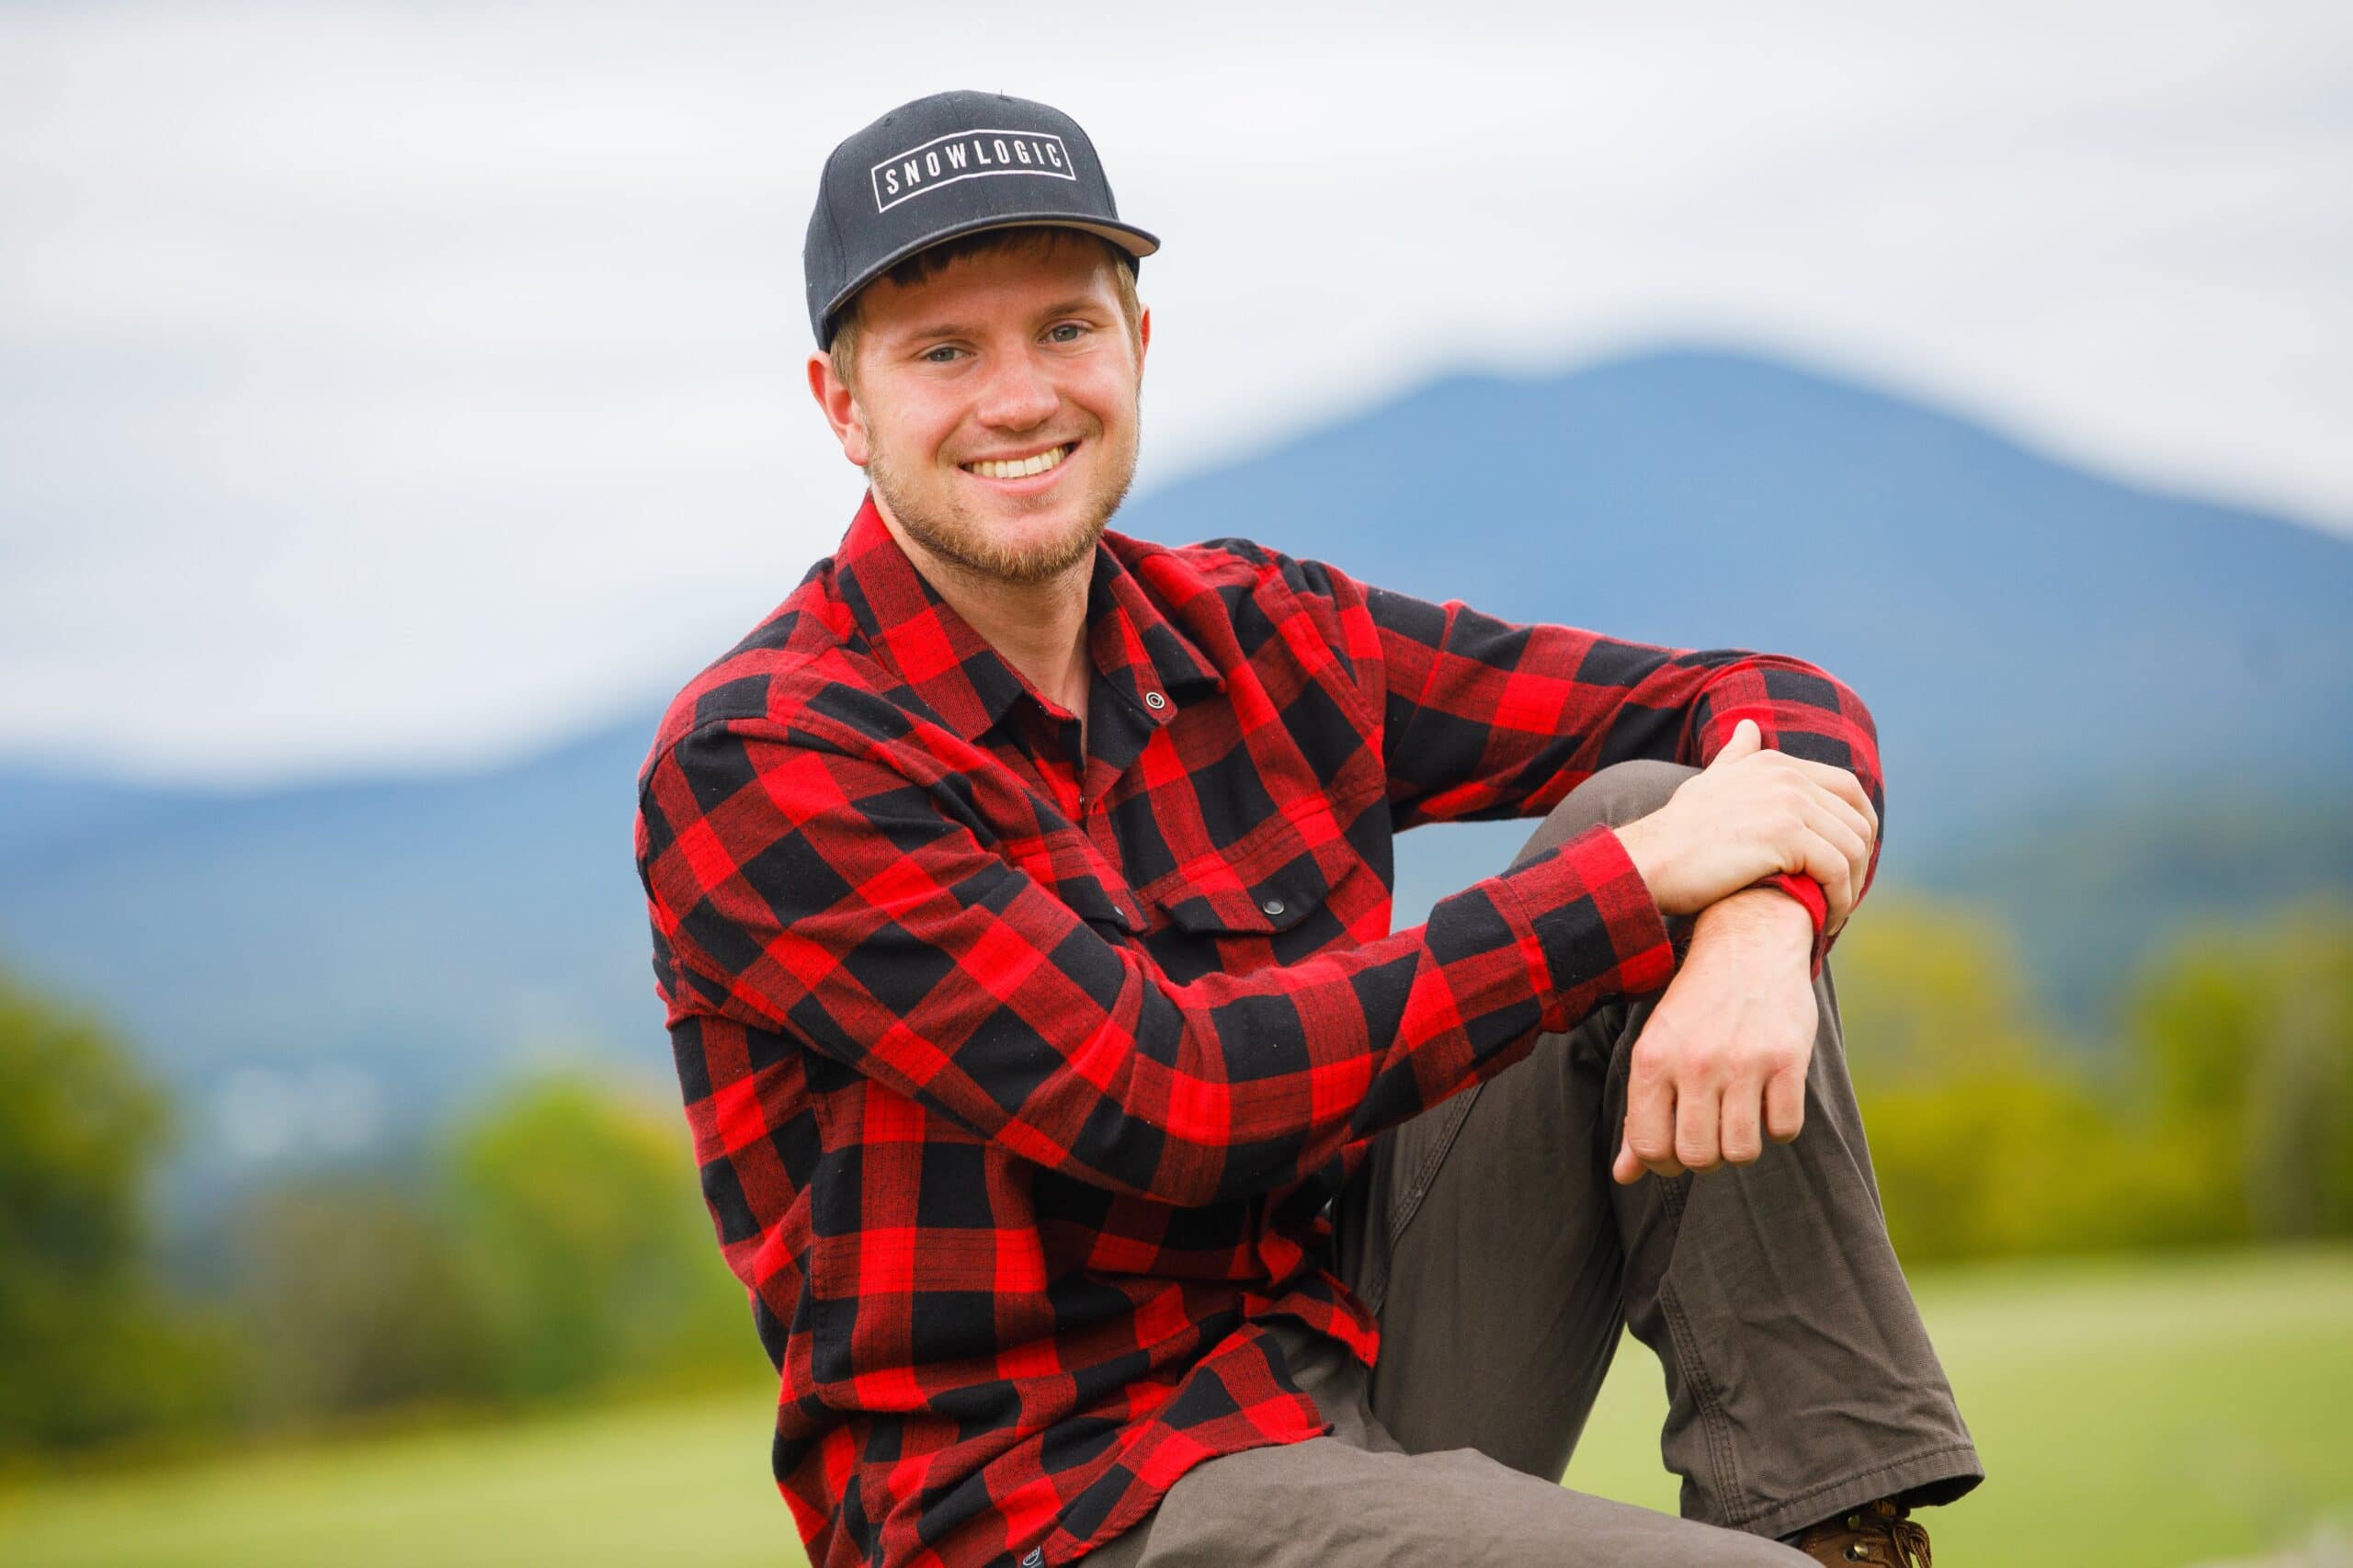 A young man in a baseball cap wearing a red check flannel shirt smiles at the camera.